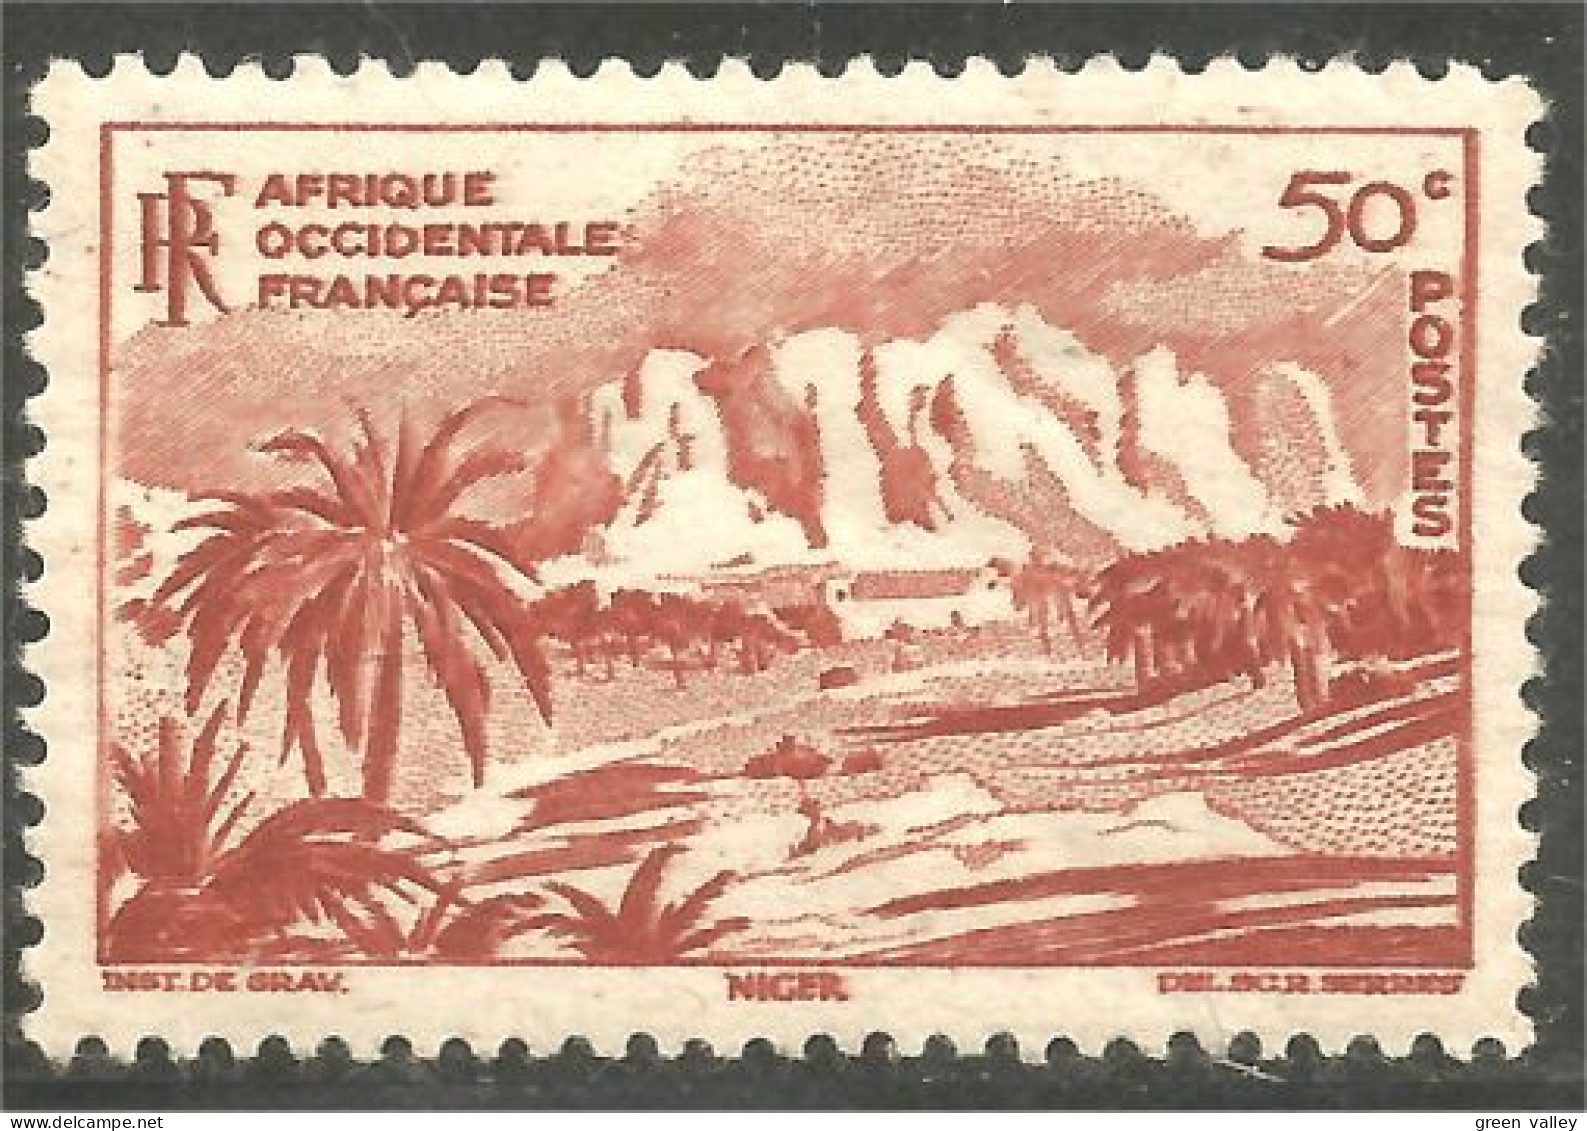 372 AOF Montagne Niger Mountain MH * Neuf (f3-AEF-368a) - Ongebruikt